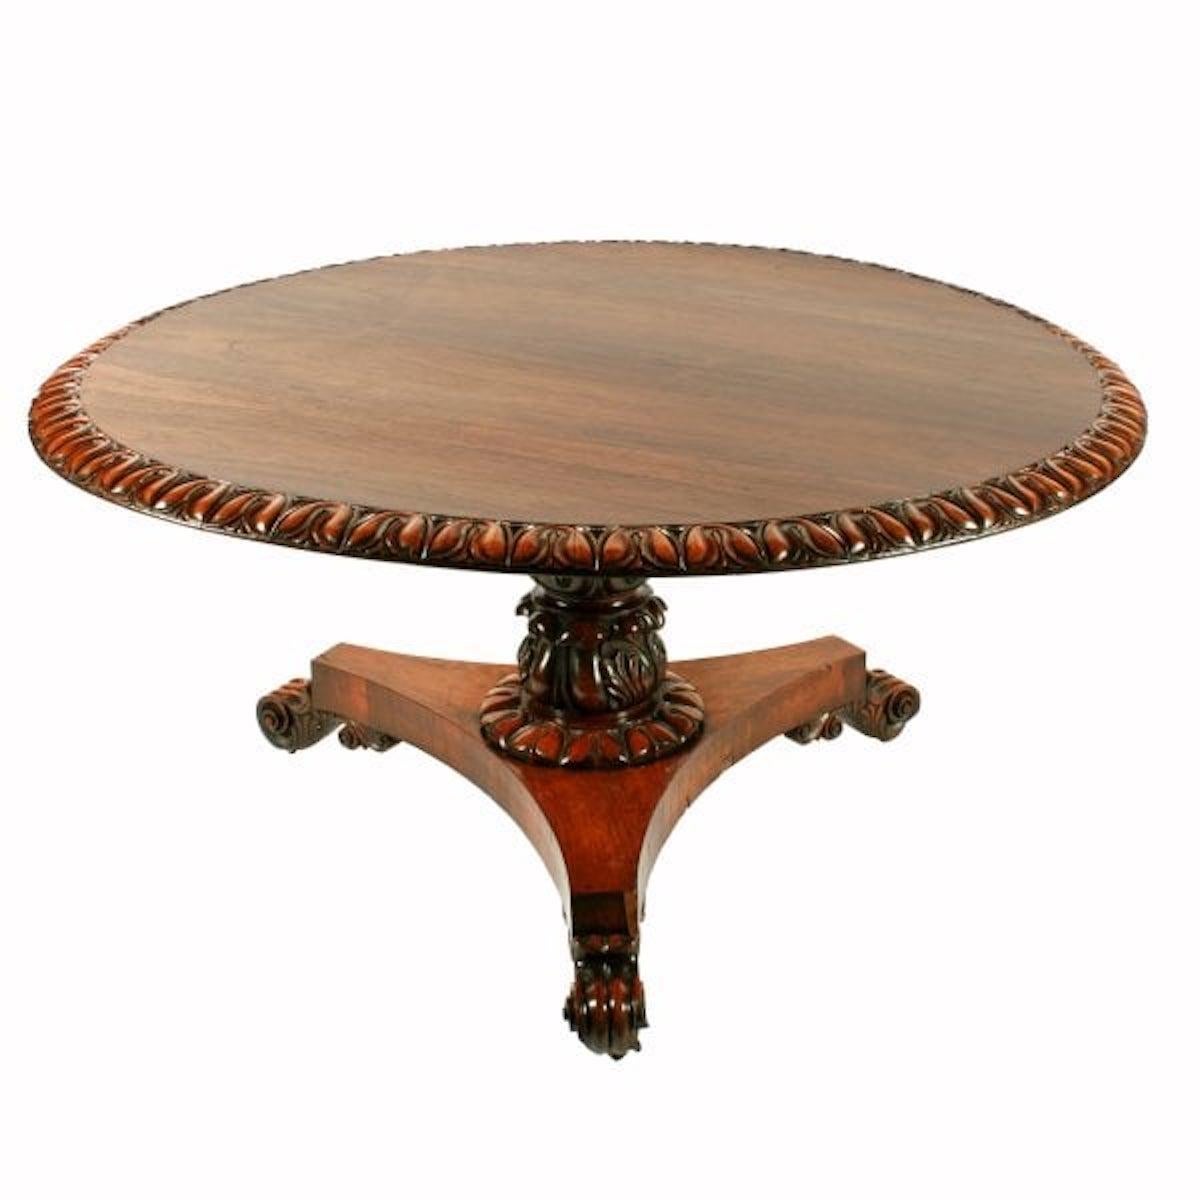 George IV rosewood centre table

A large early 19th century George IV rosewood centre or breakfast table.

The rosewood veneered circular top has a broad lappet carved edge and is held by pins in the base that allow the top to tip.

The